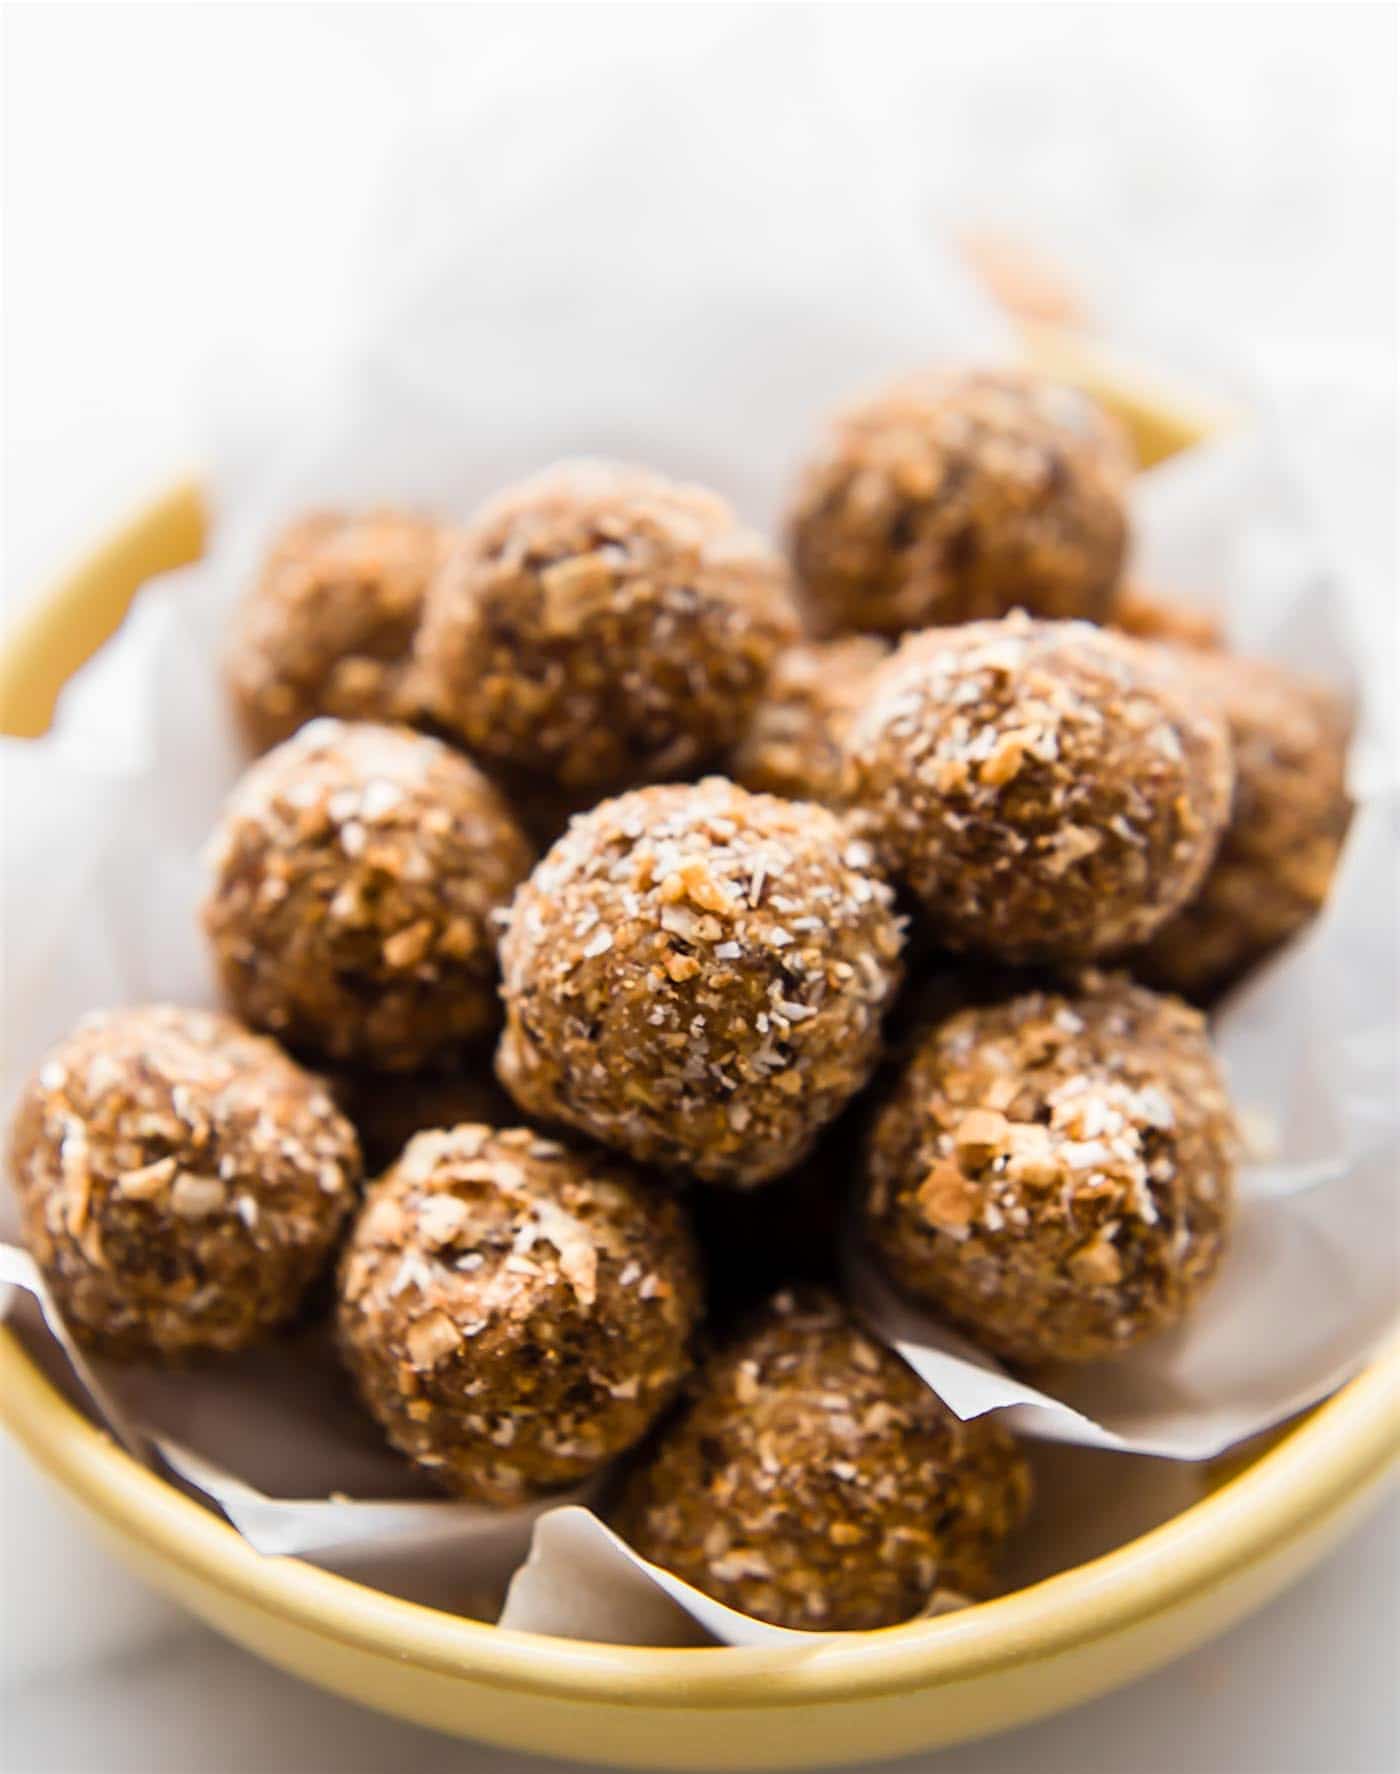 Toasted Coconut Bliss balls. in a yellow bowl